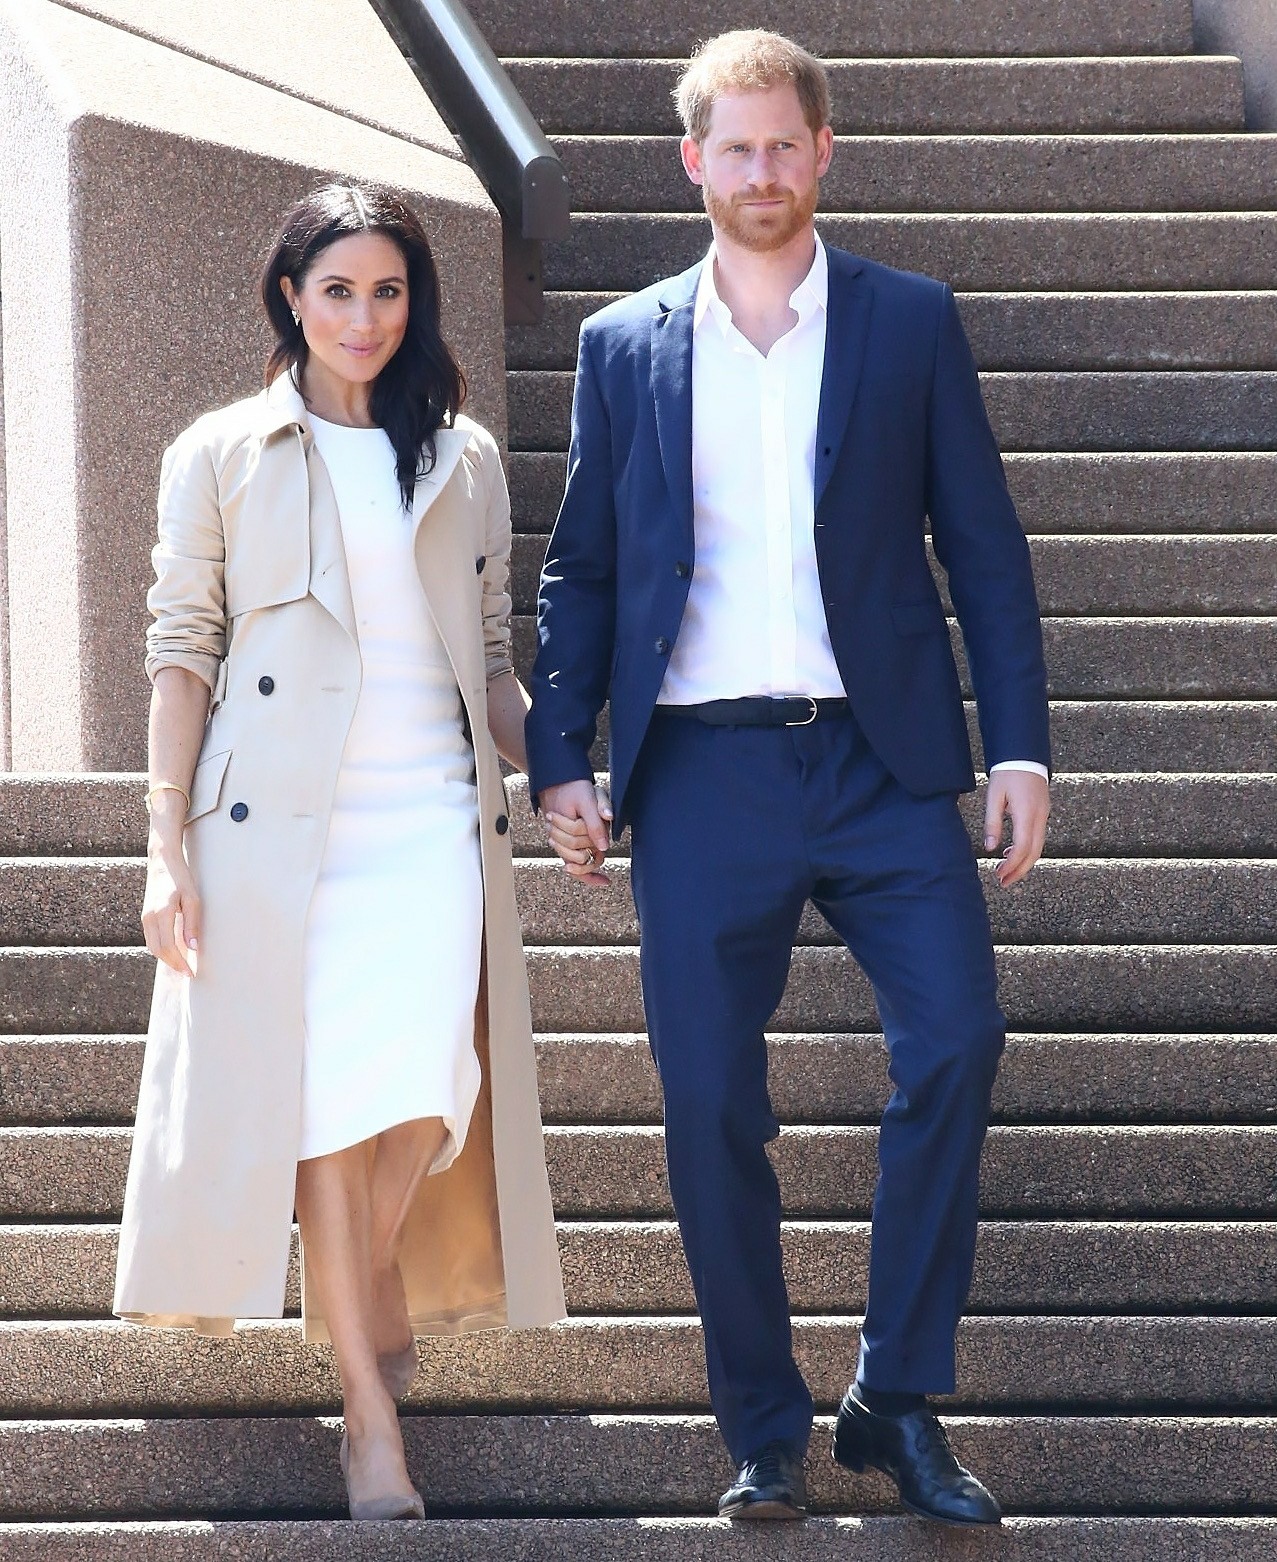 Pregnant Meghan Markle and Prince Harry arrive at the Sydney Opera House